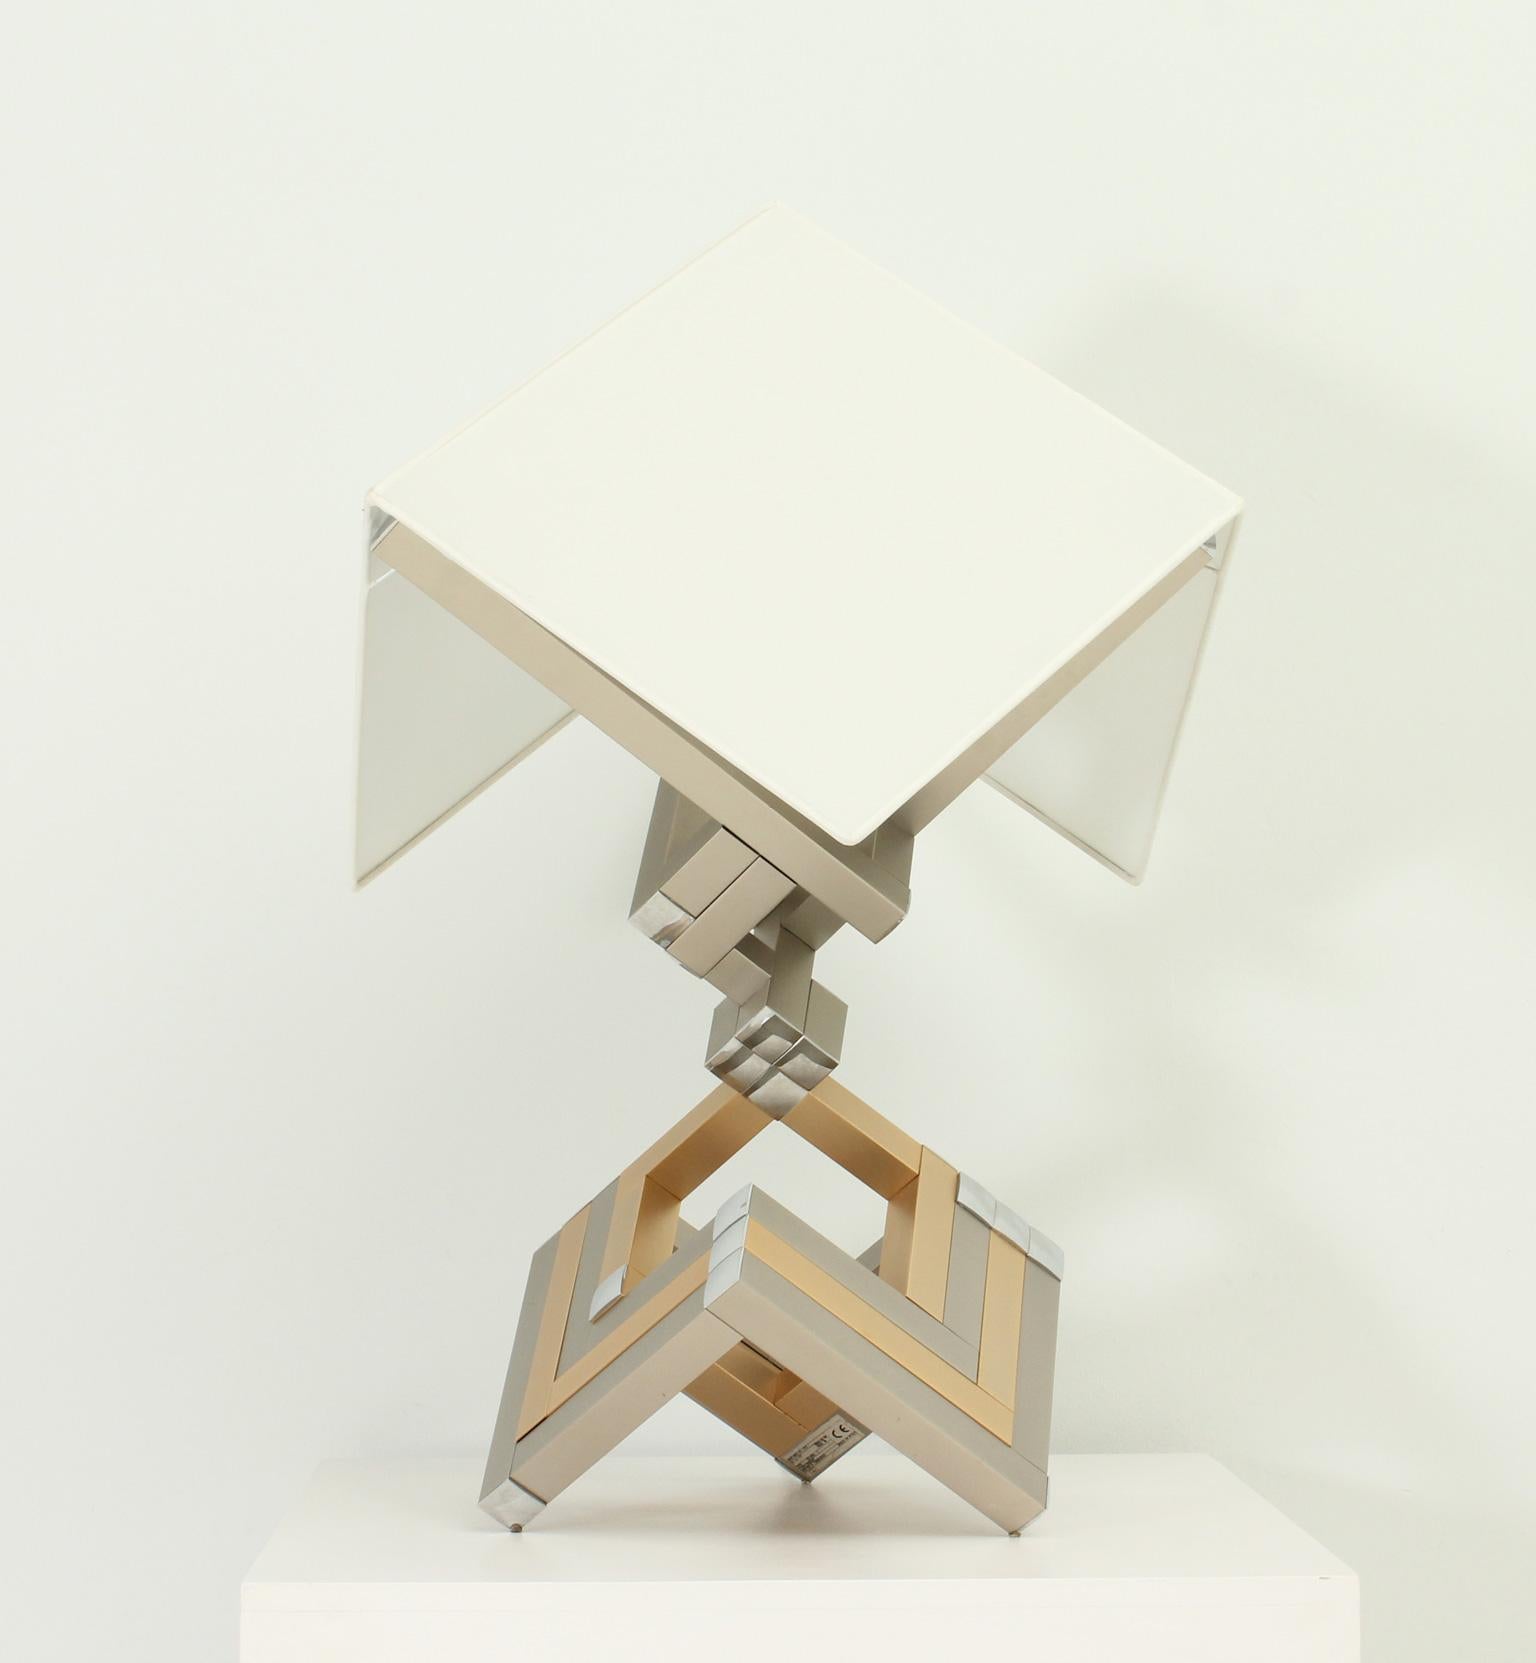 Rare table lamp designed in 1970's by Lumica, Spain. Chrome, brass and polished steel structure supporting three bulbs and a square shade with new fabric.